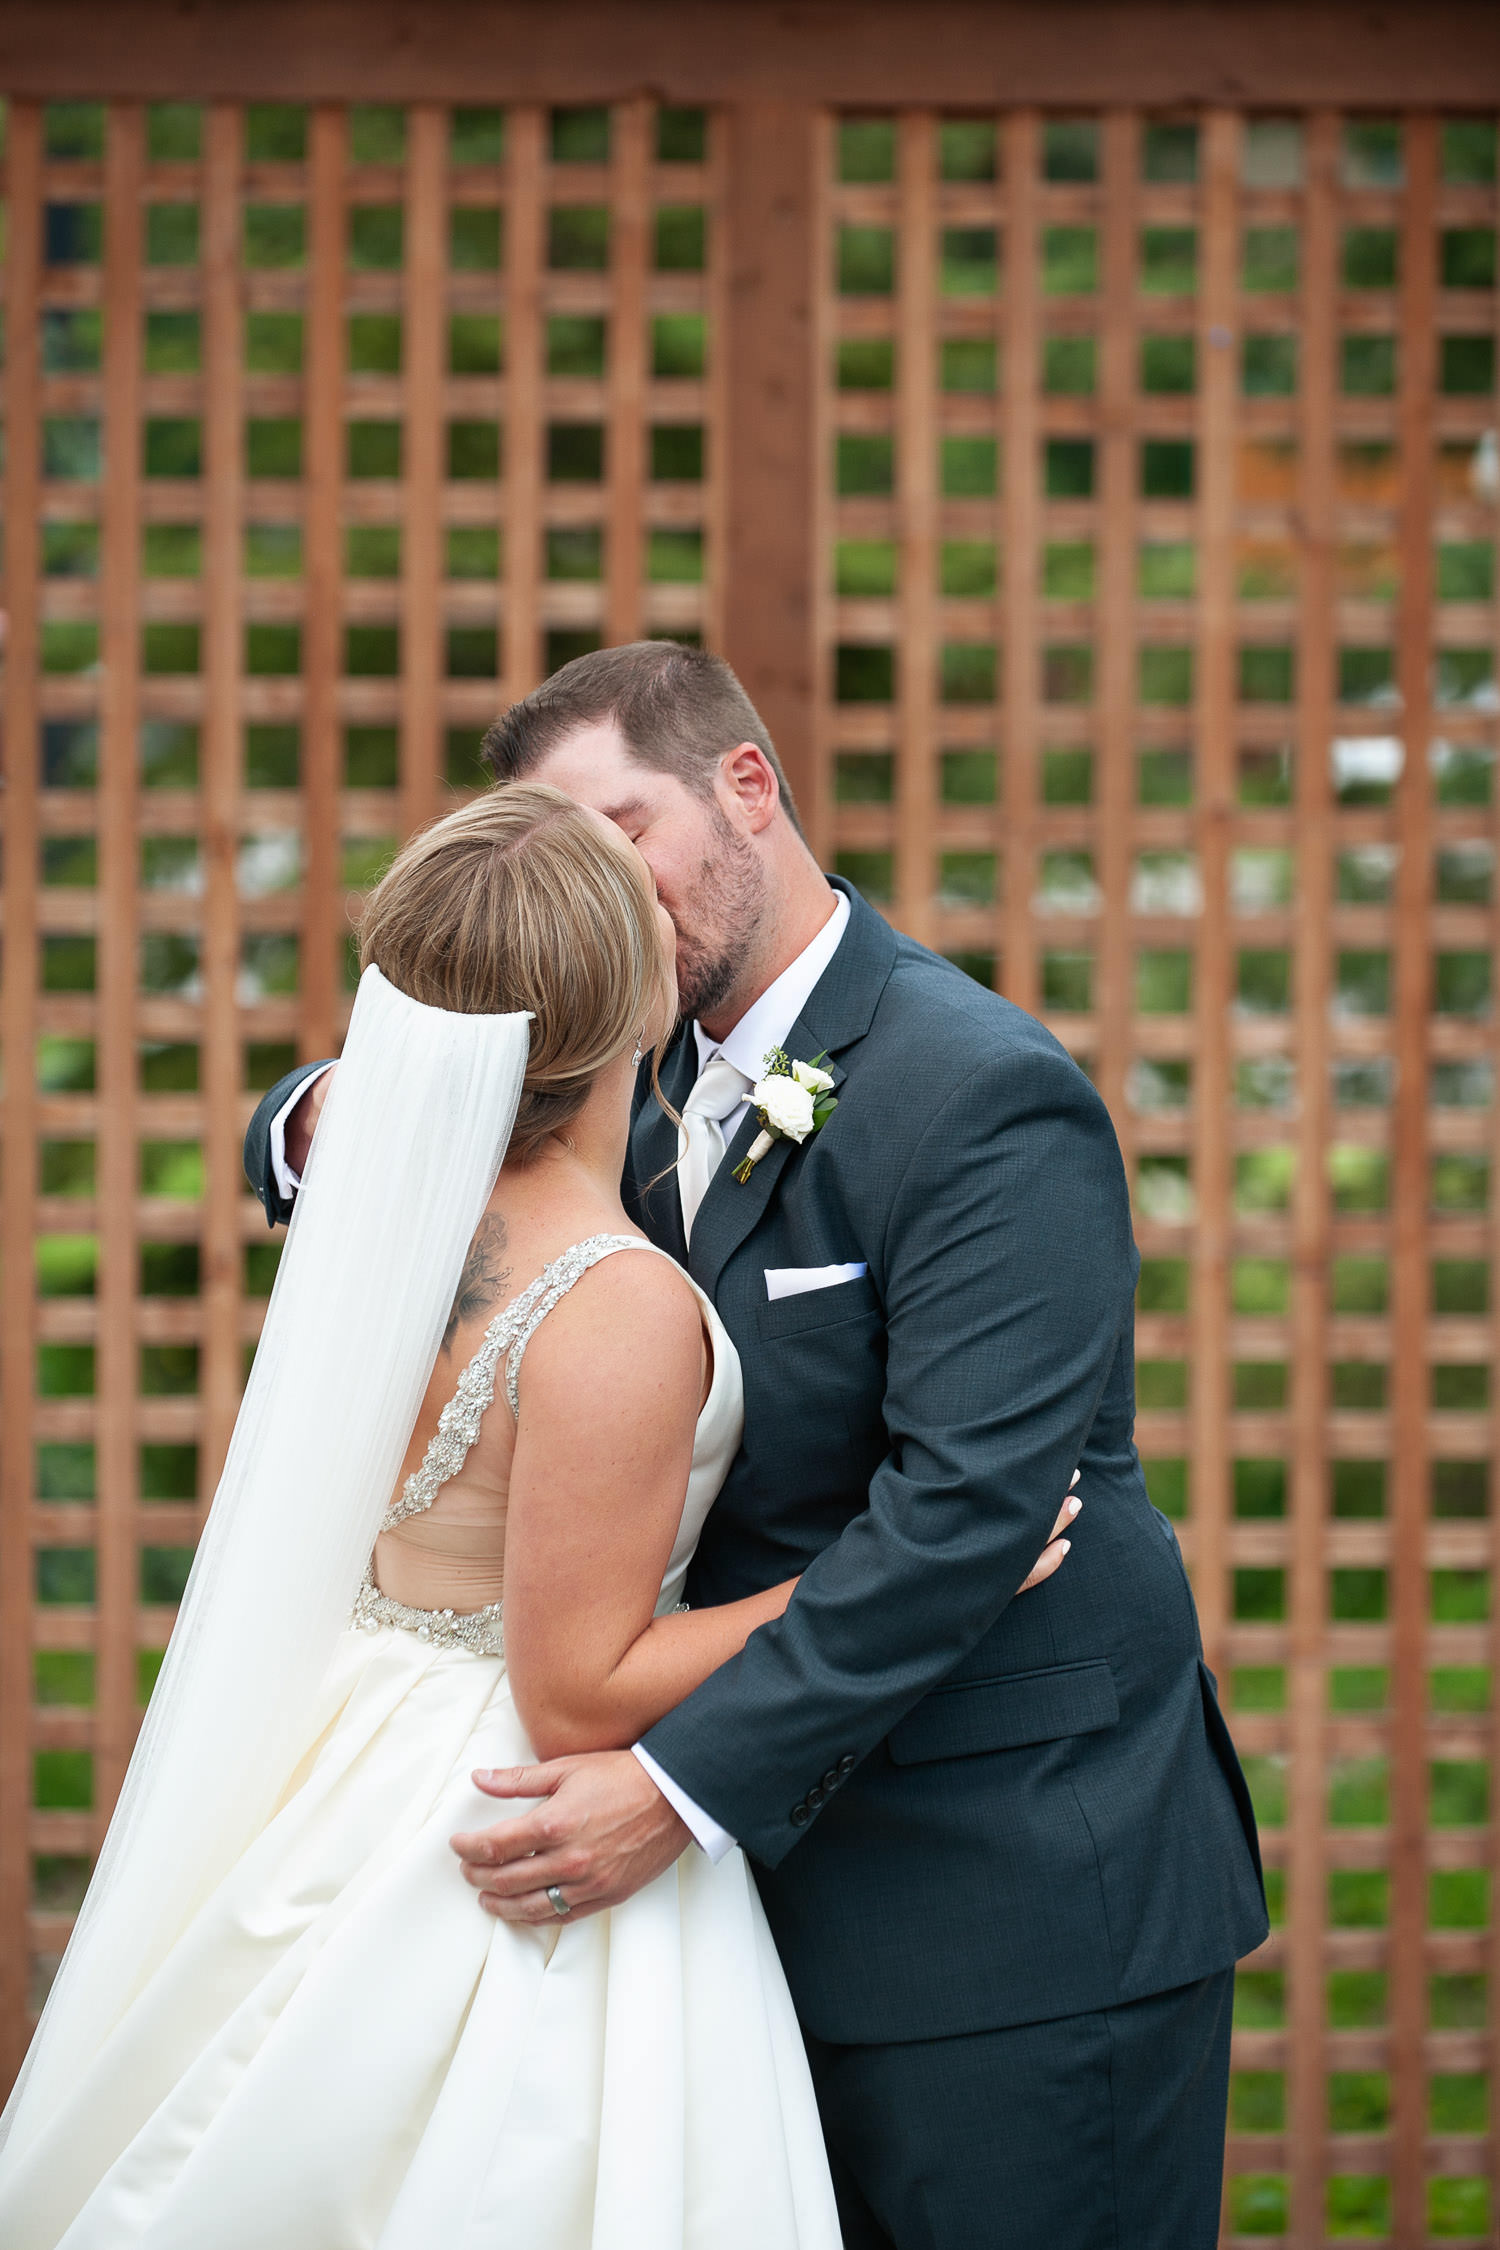 First kiss after a Creekside Villa wedding captured by Canmore wedding photographer Tara Whittaker